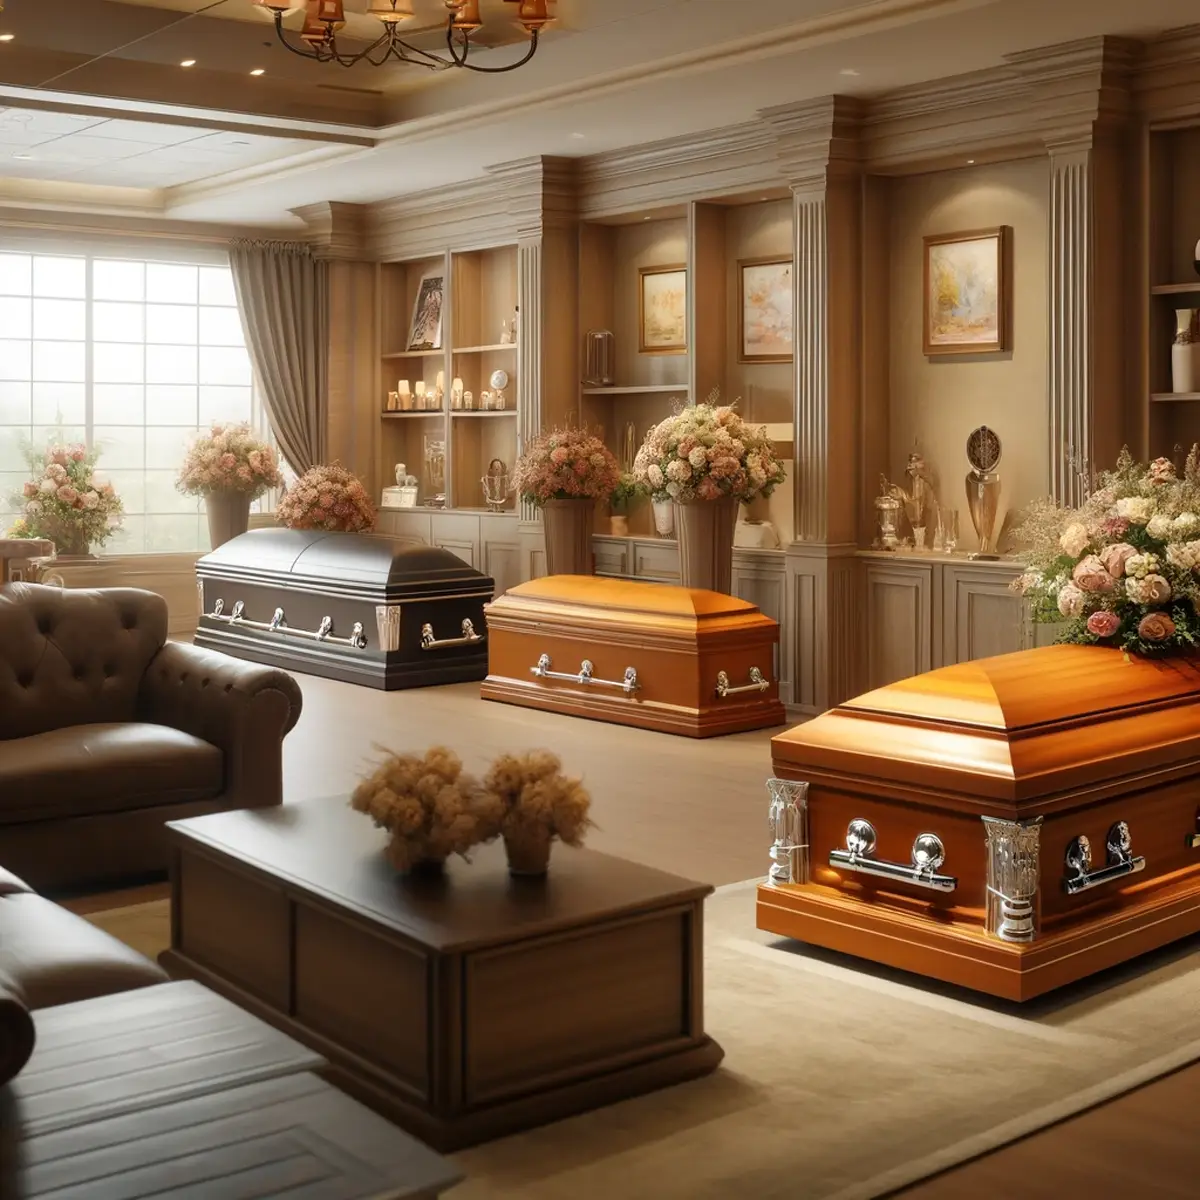 Funeral Services Proposal Concepts